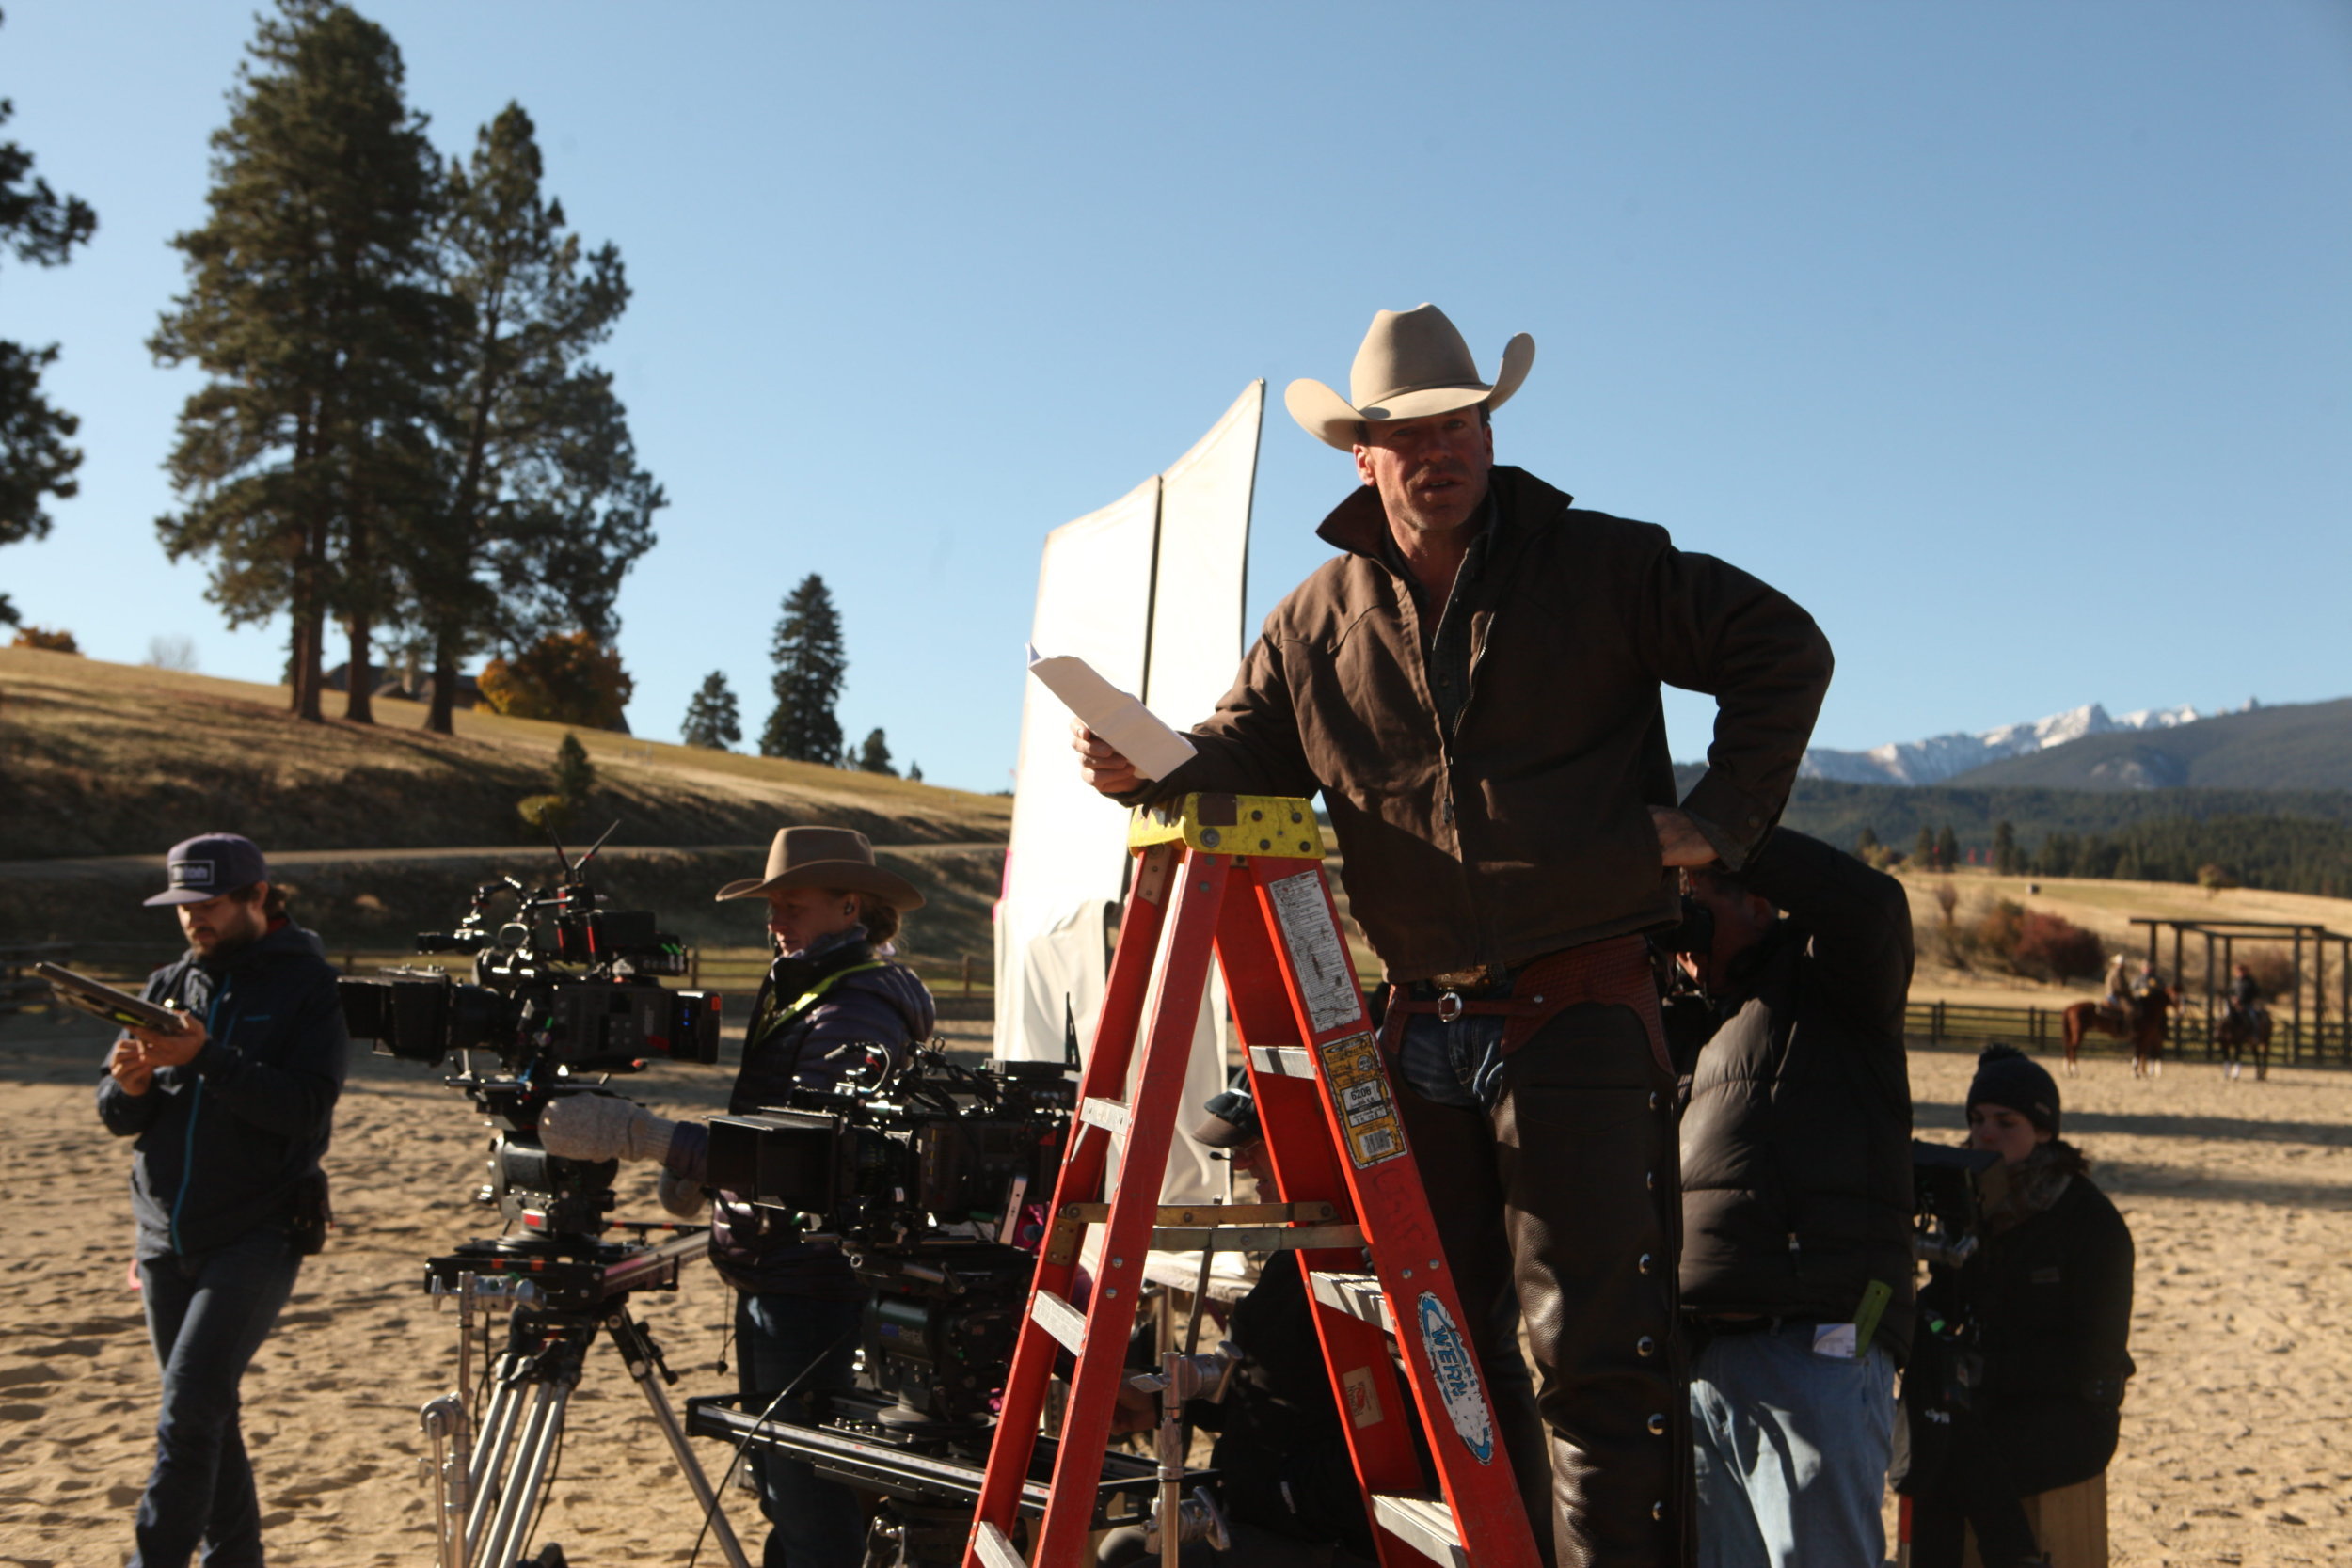 ART OF THE CUT with the editors of "Yellowstone" 20